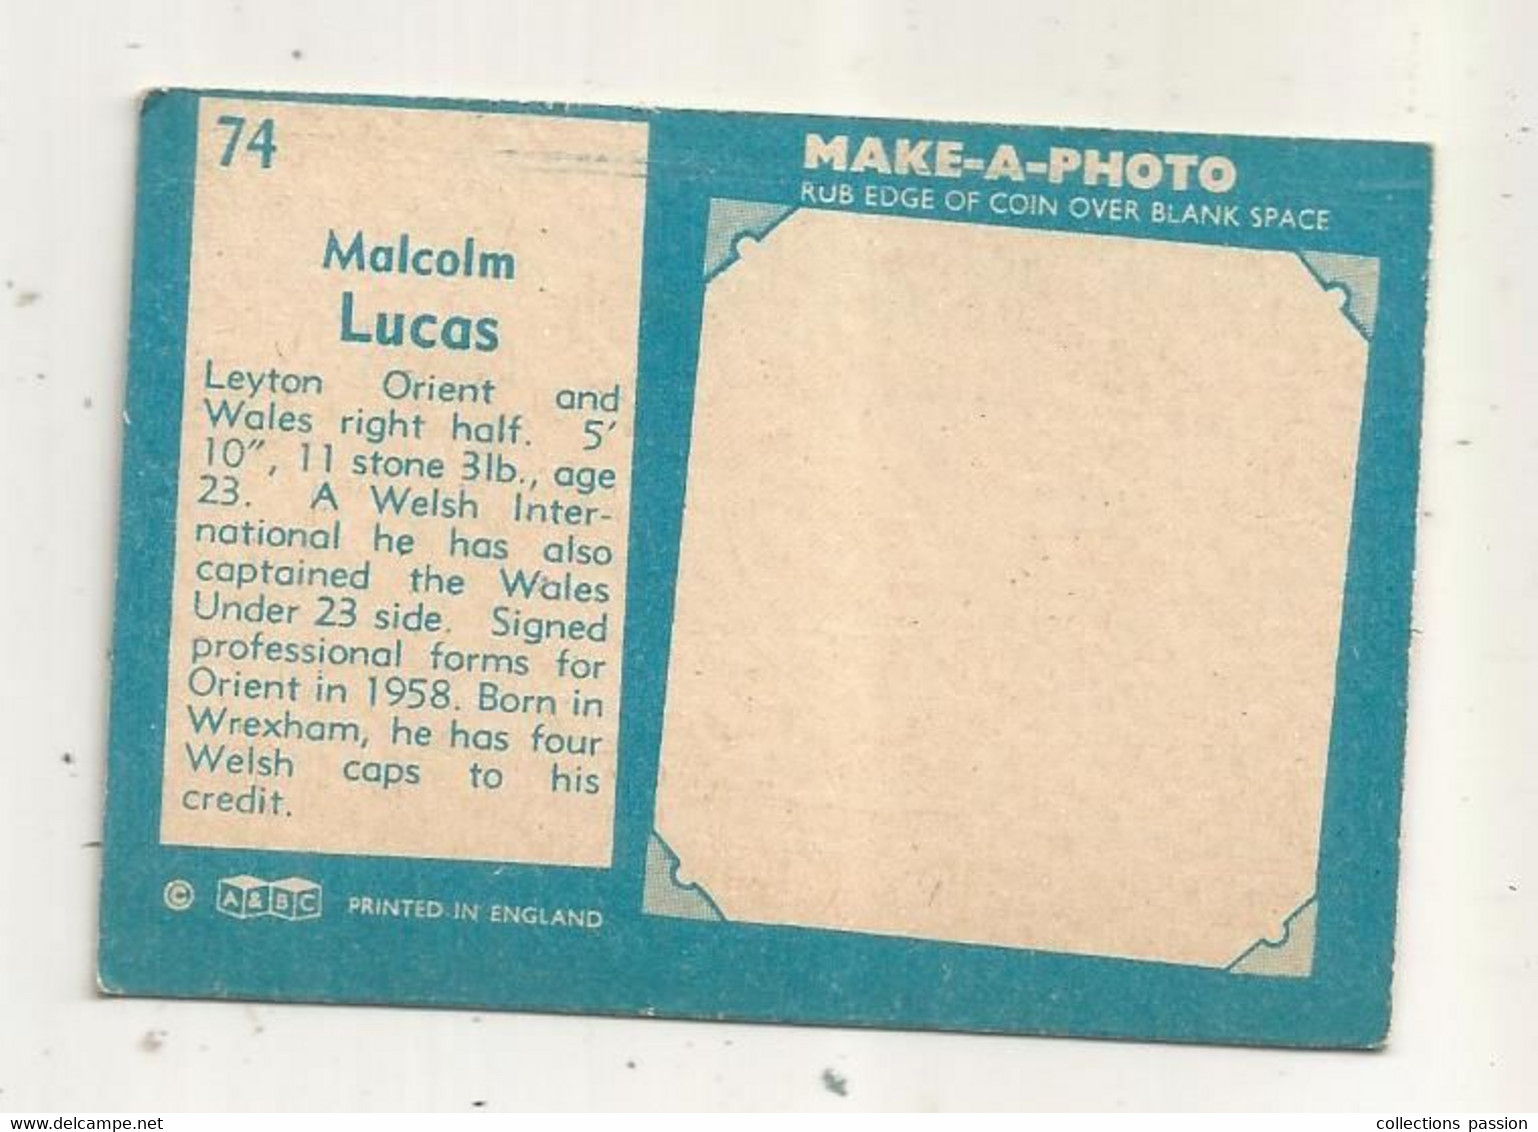 Trading Card , A&BC , England , Chewing Gum , Serie : Make A Photo , Année 60 , N° 74 , MALCOLM LUCAS , Leyron Orient - Trading-Karten